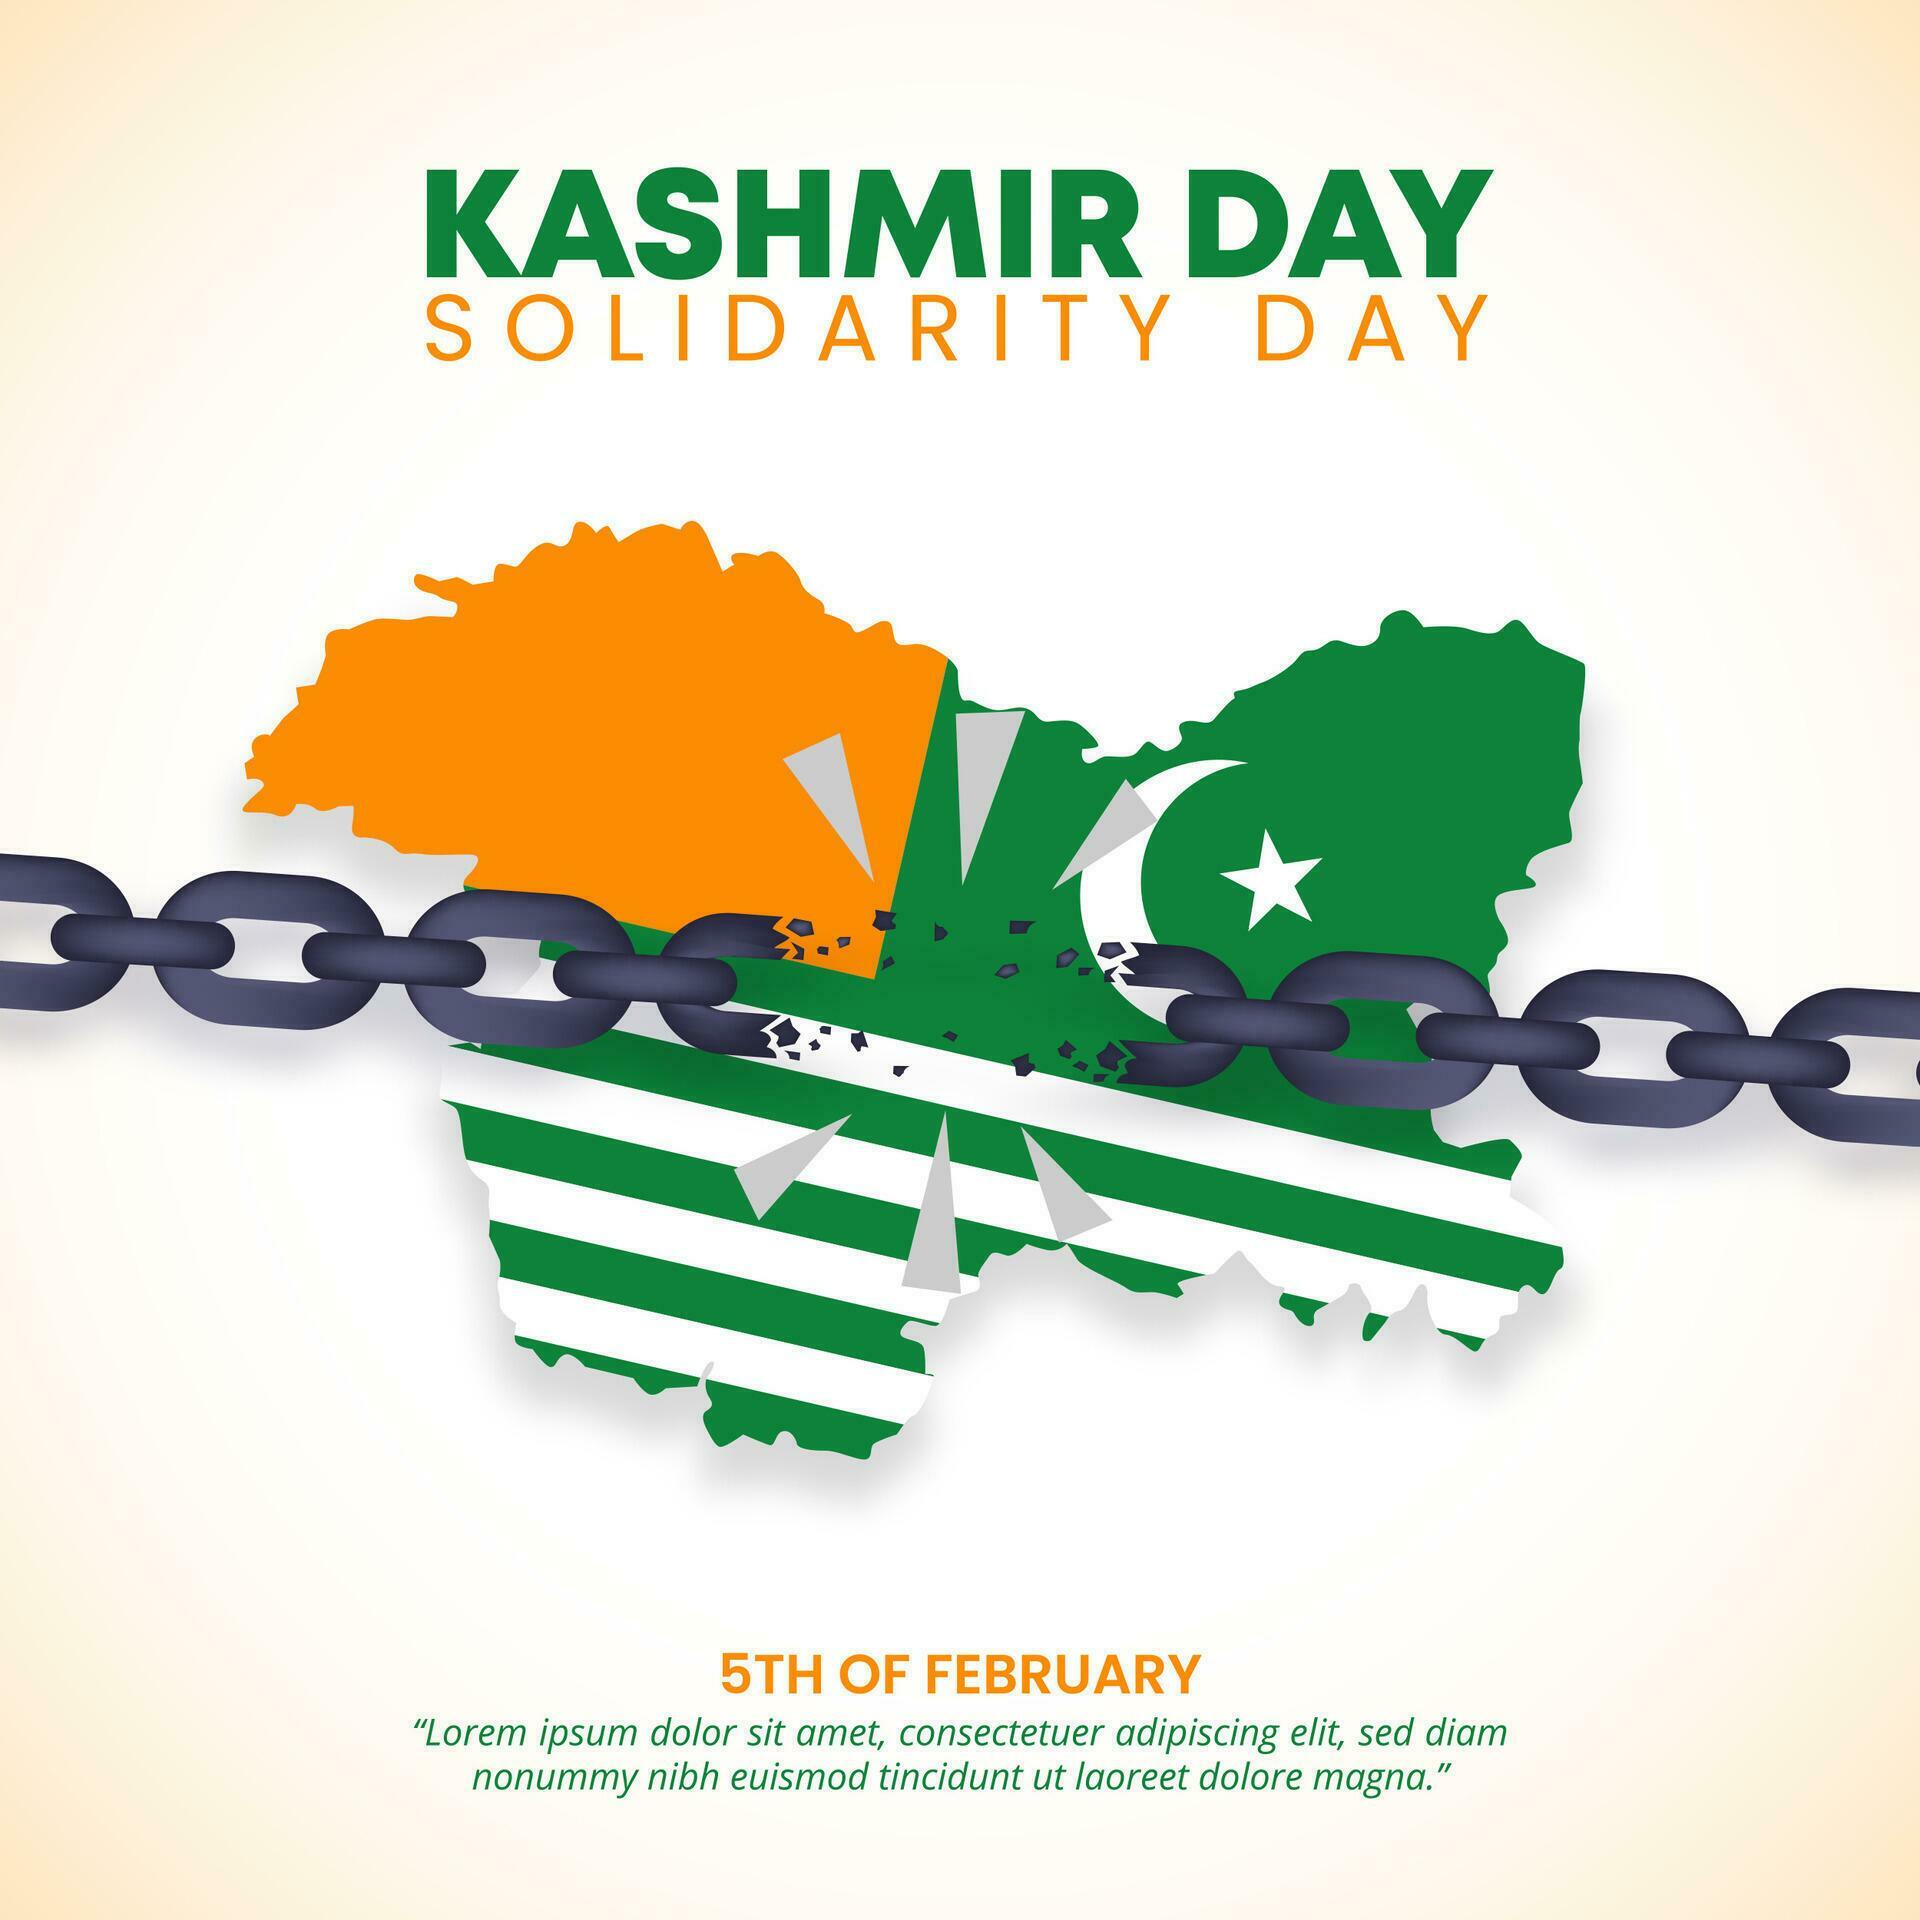 Kashmir Day Solidarity Day Background With A Kashmir Flag Map And